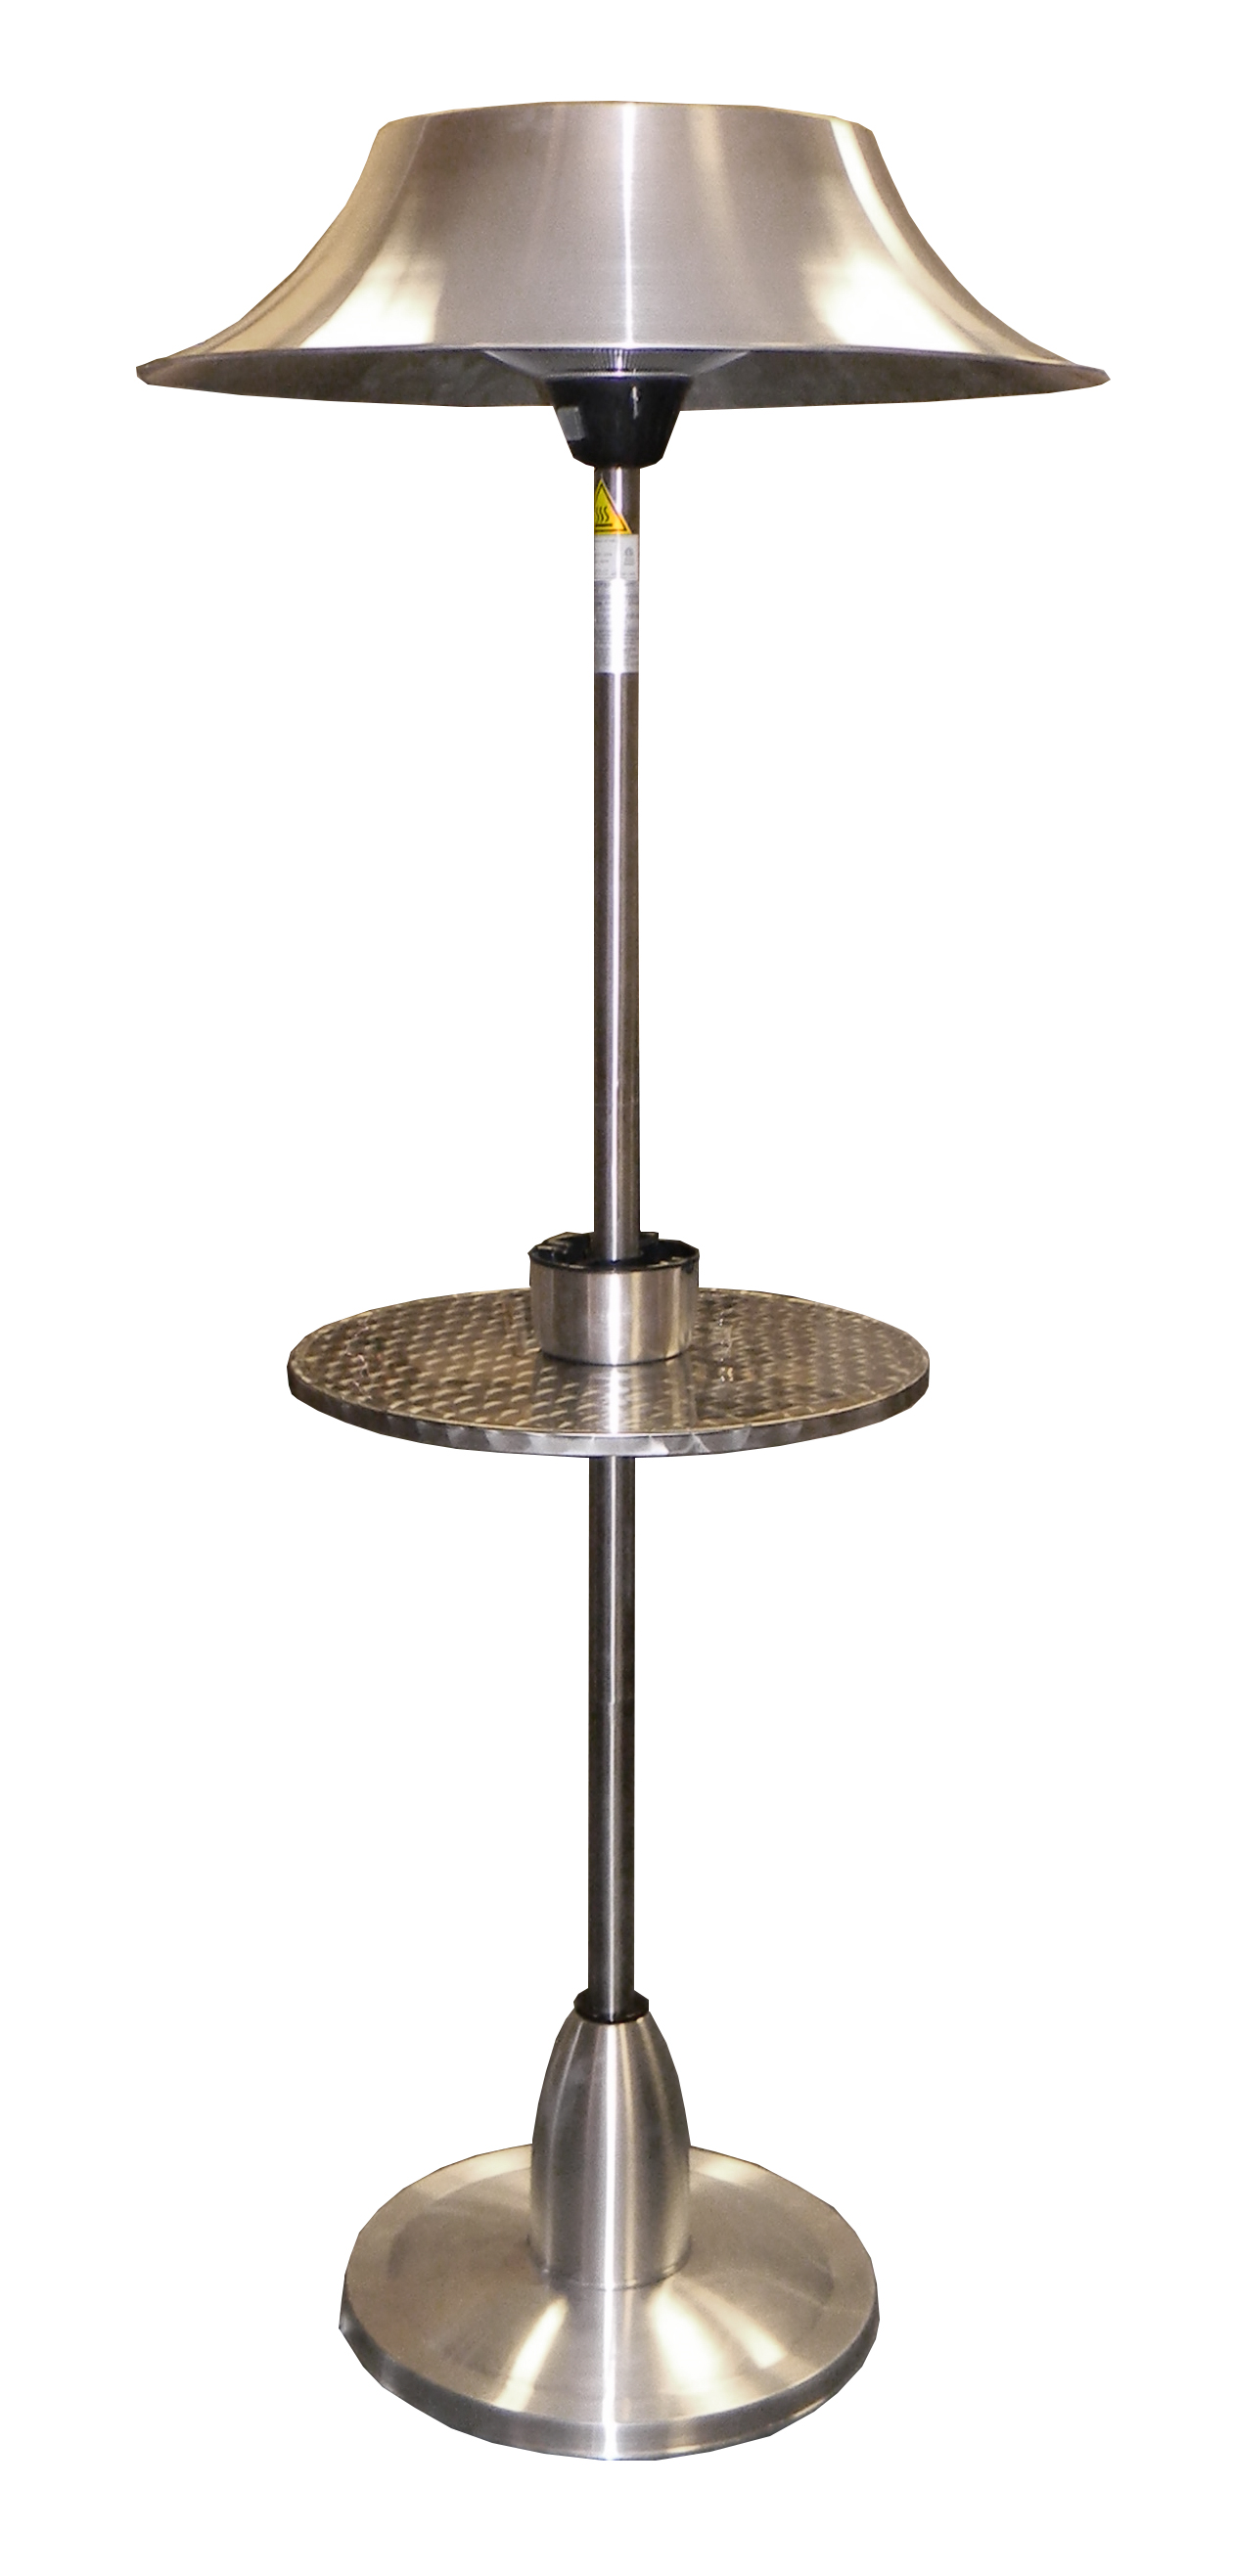 Tall Electric Patio Heater with Table